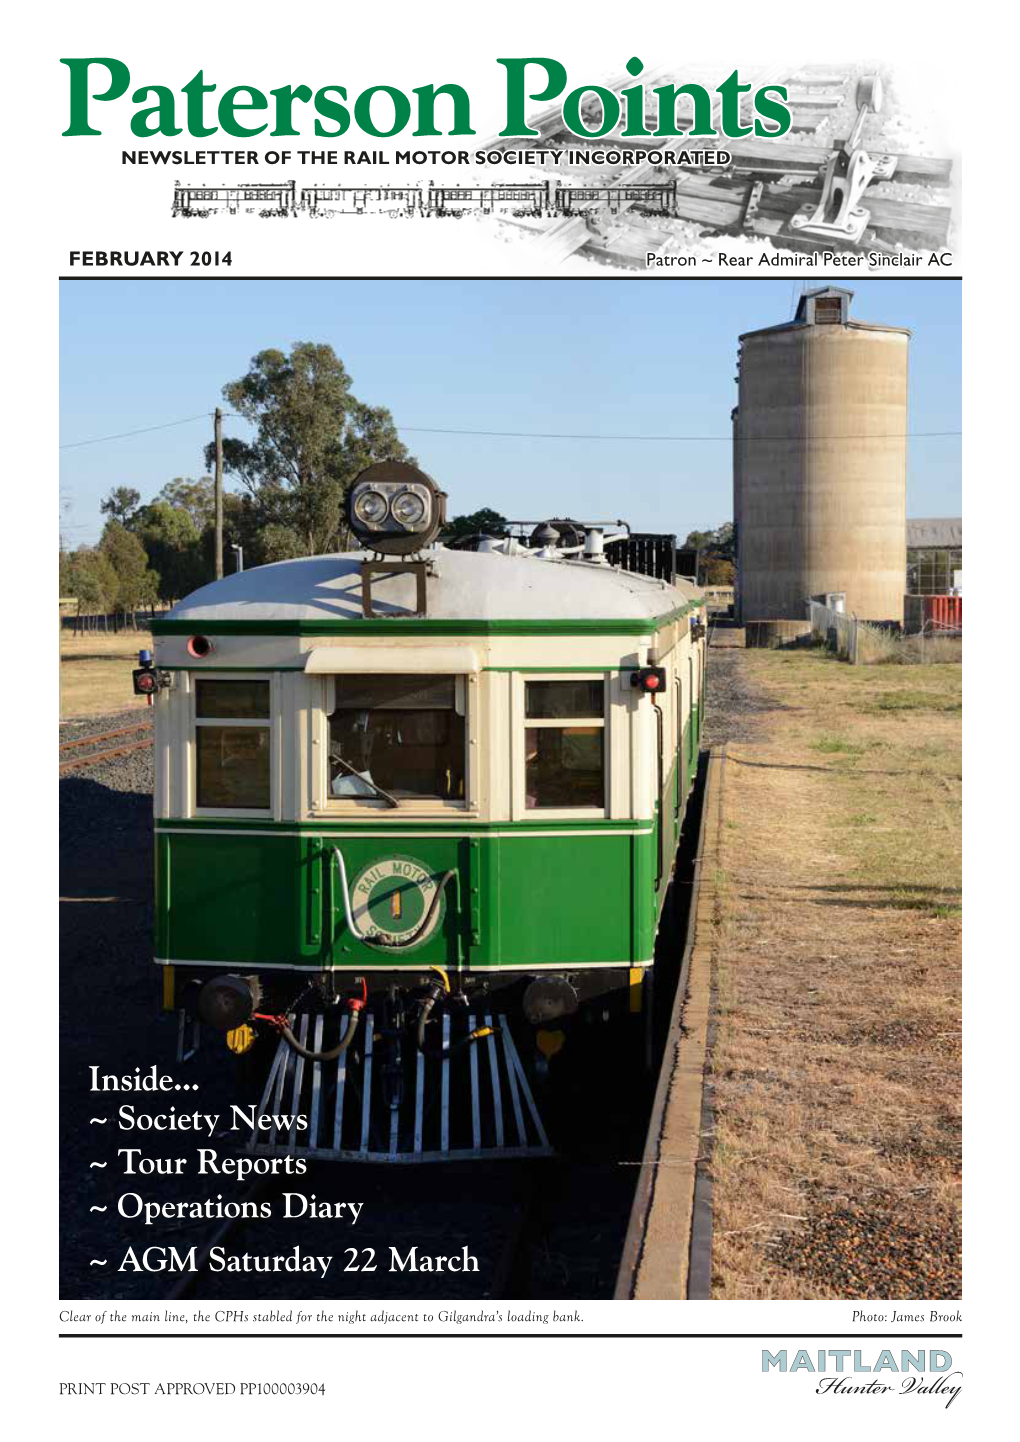 Paterson Points NEWSLETTER of the RAIL MOTOR SOCIETY INCORPORATED